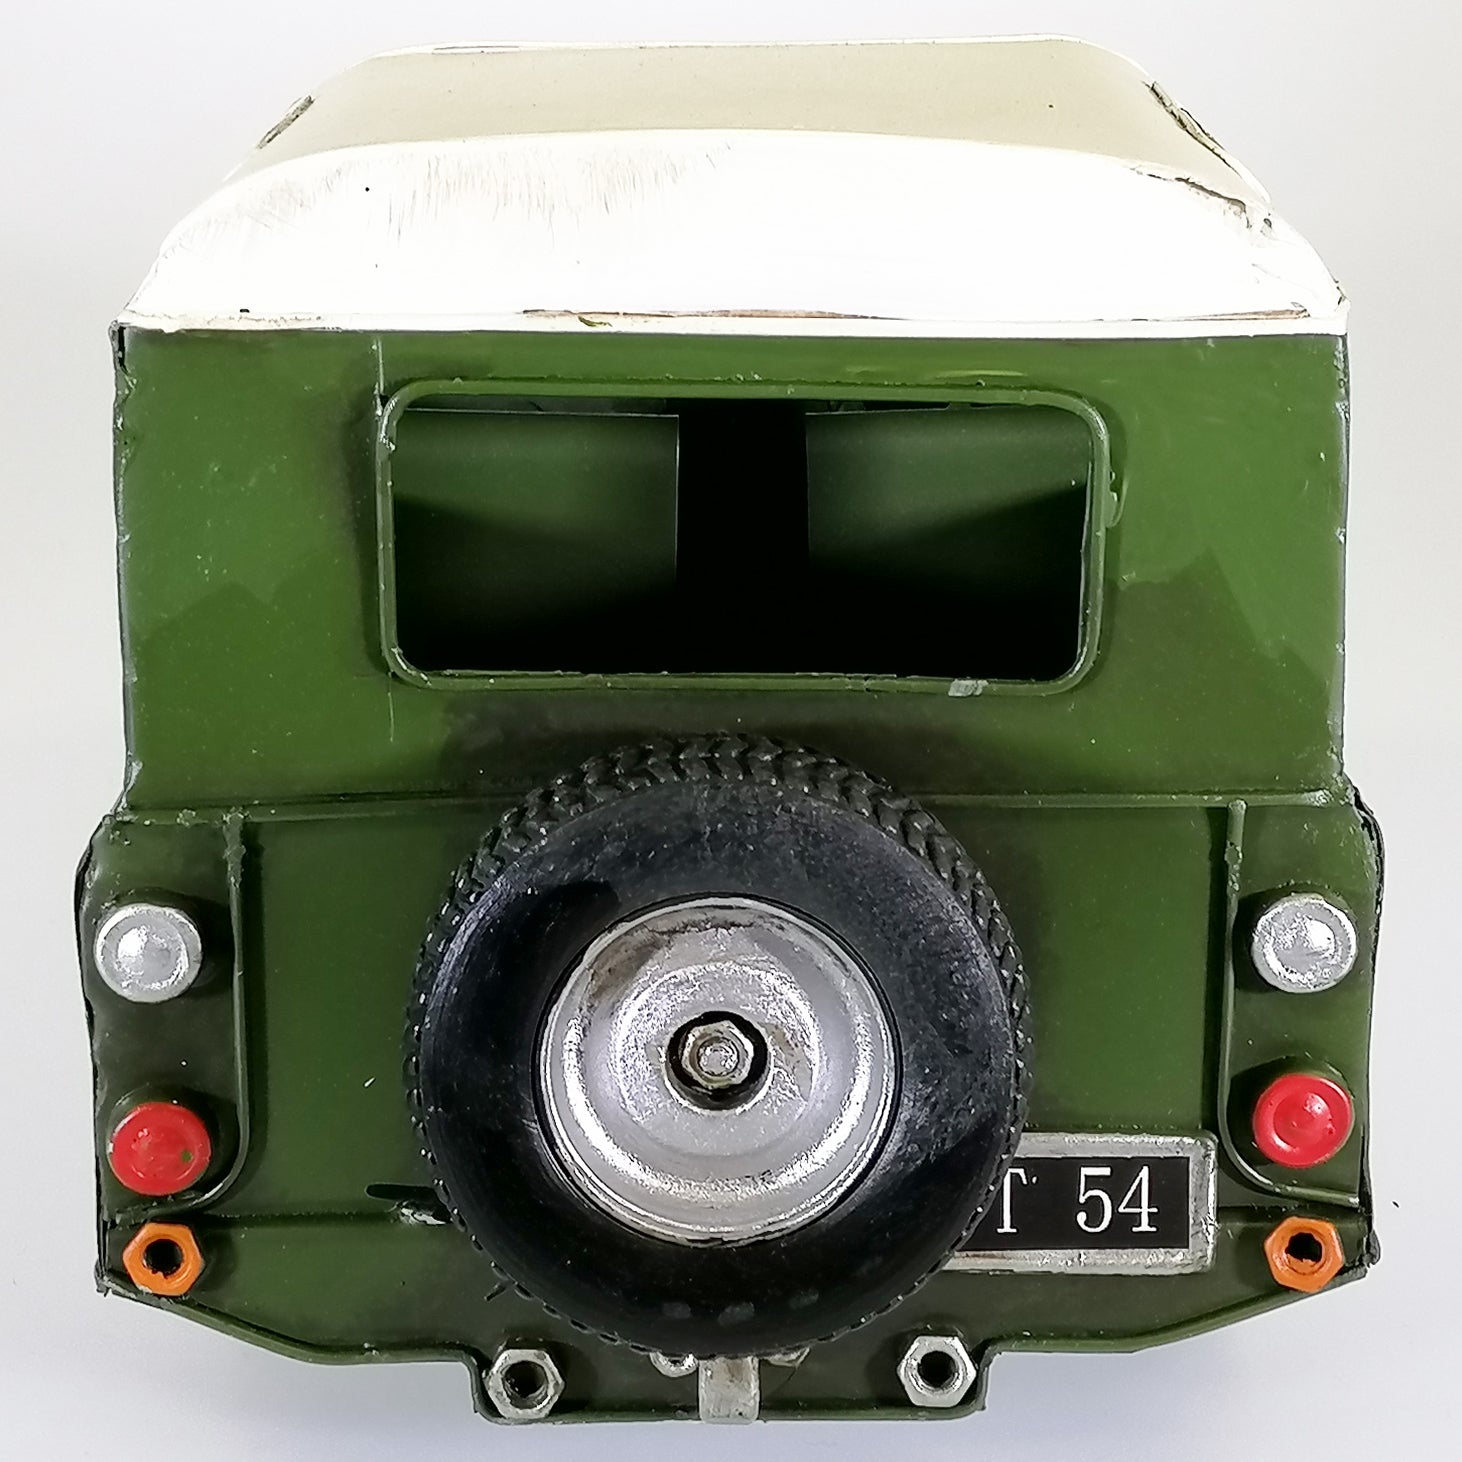 Early Model Land Rover Sculpture